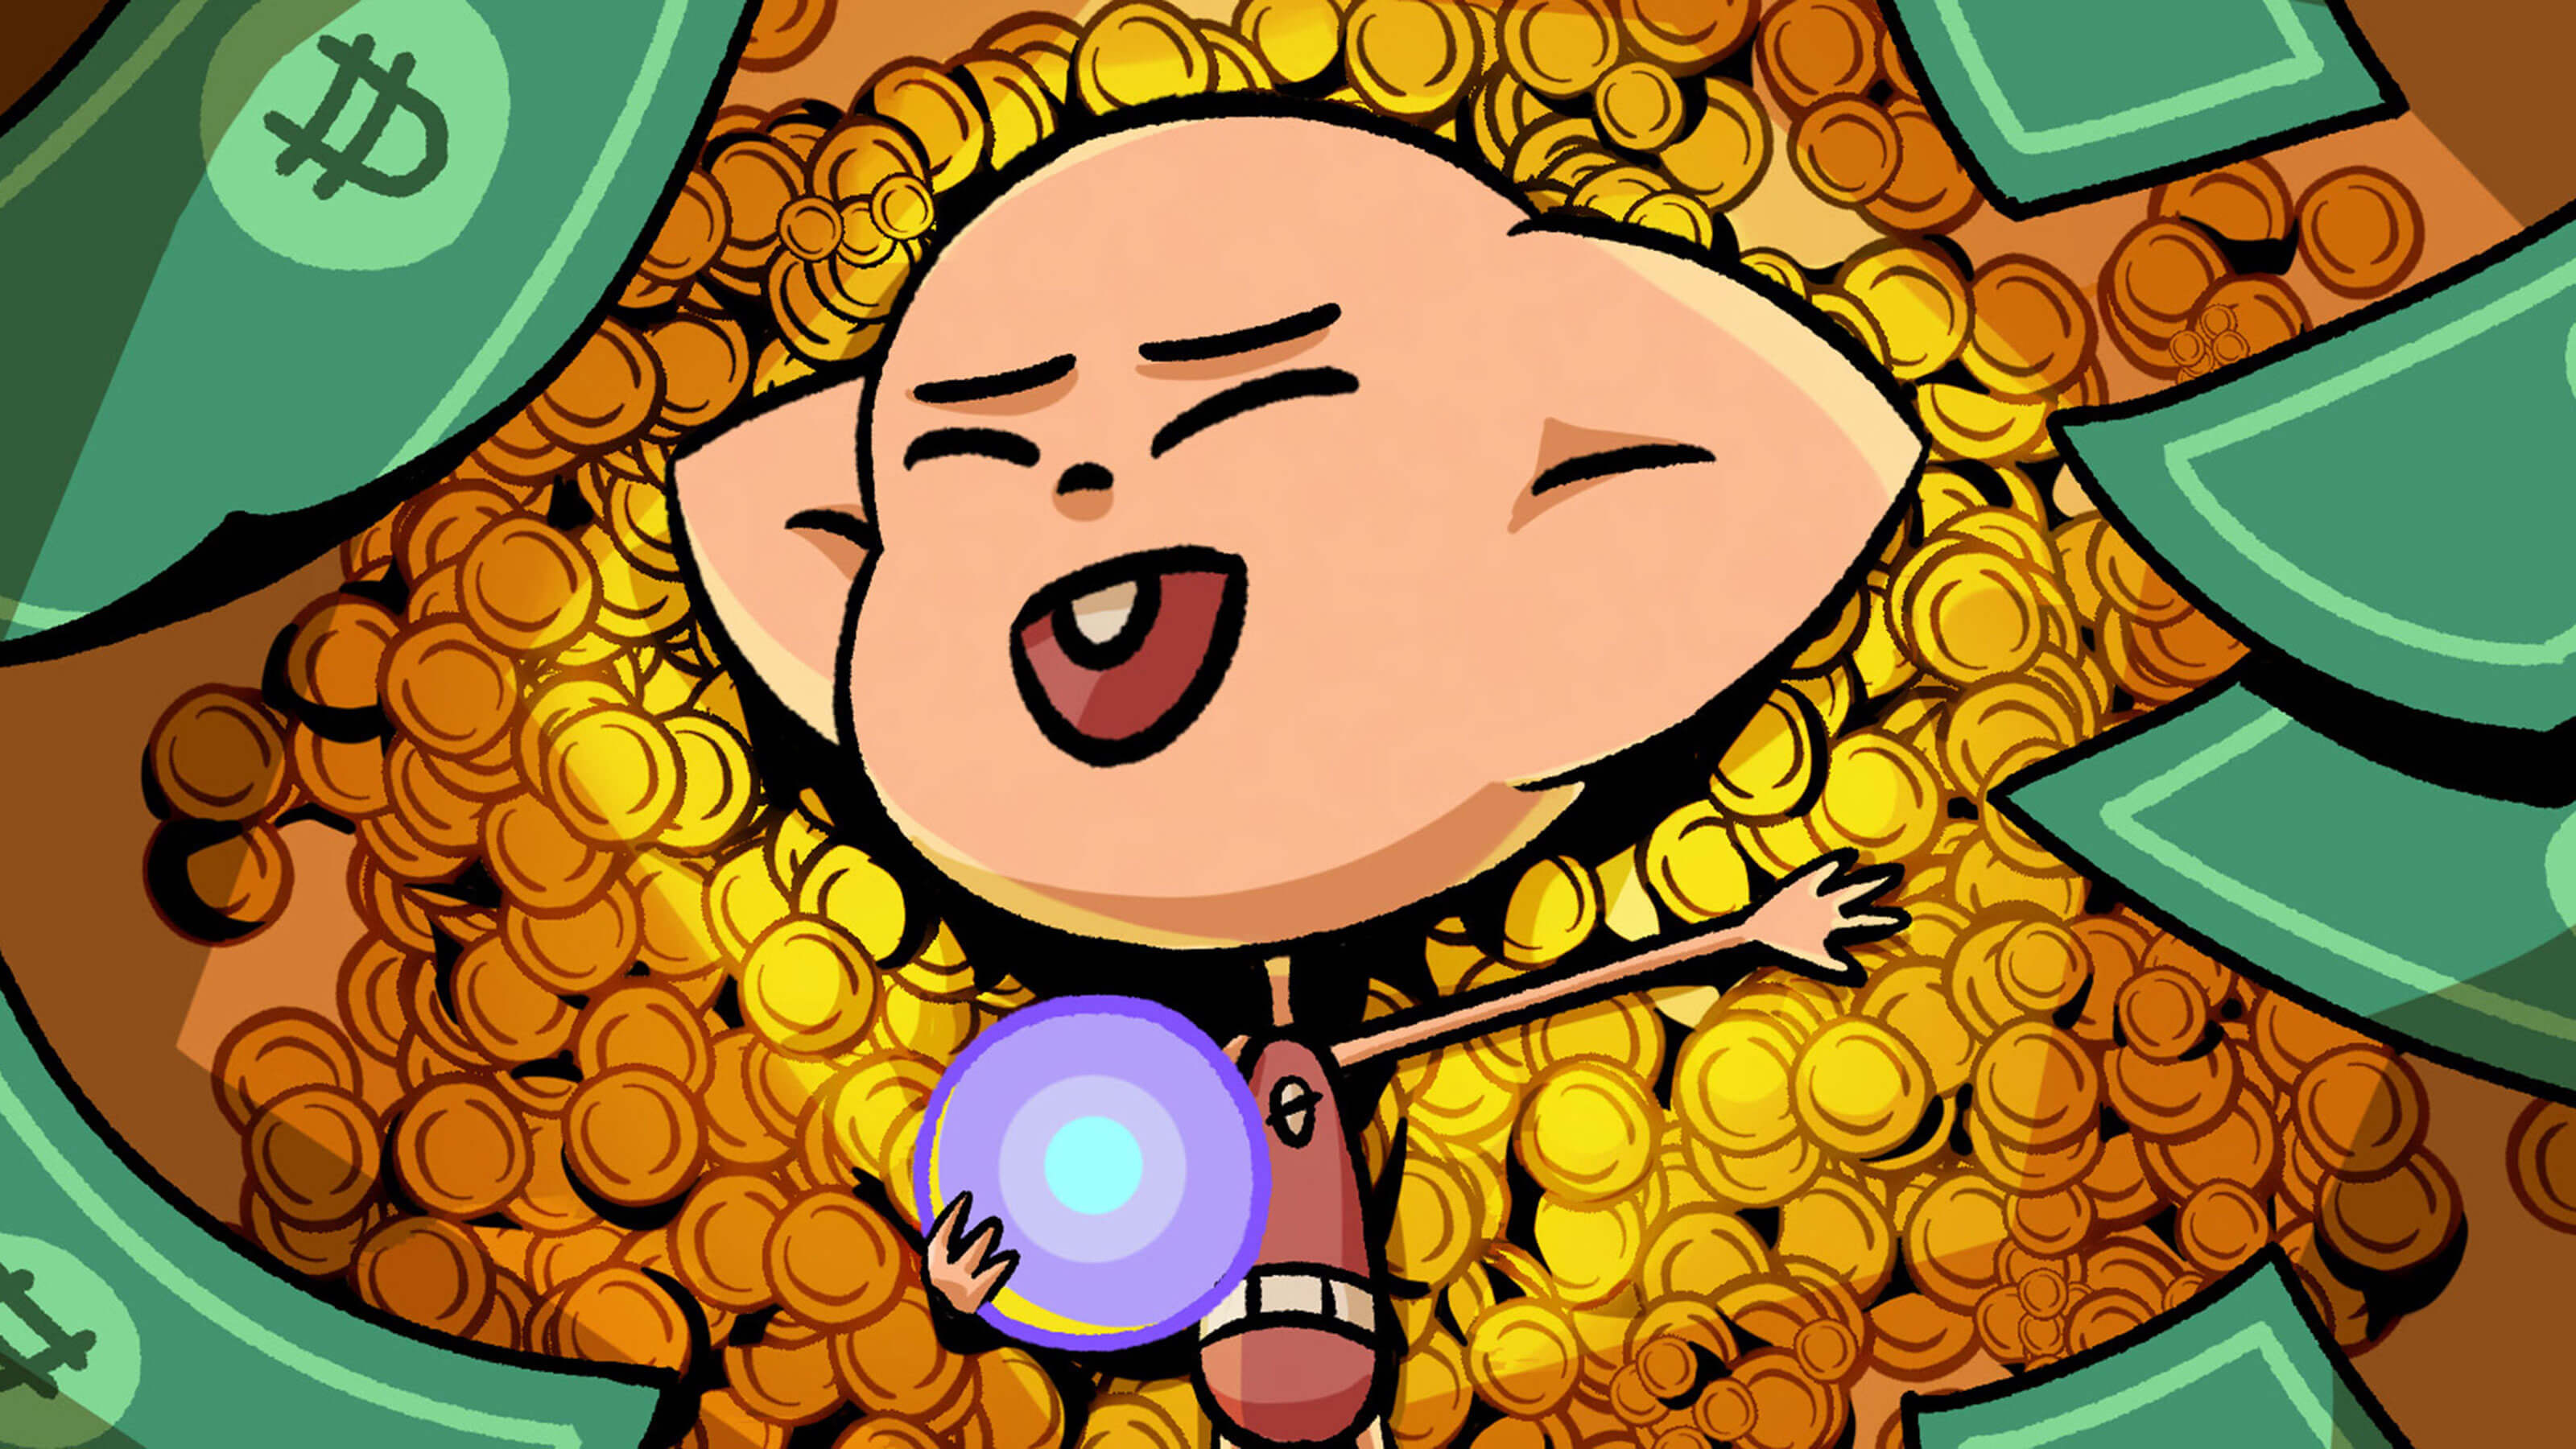 Alien character celebrates with gold coins in the background